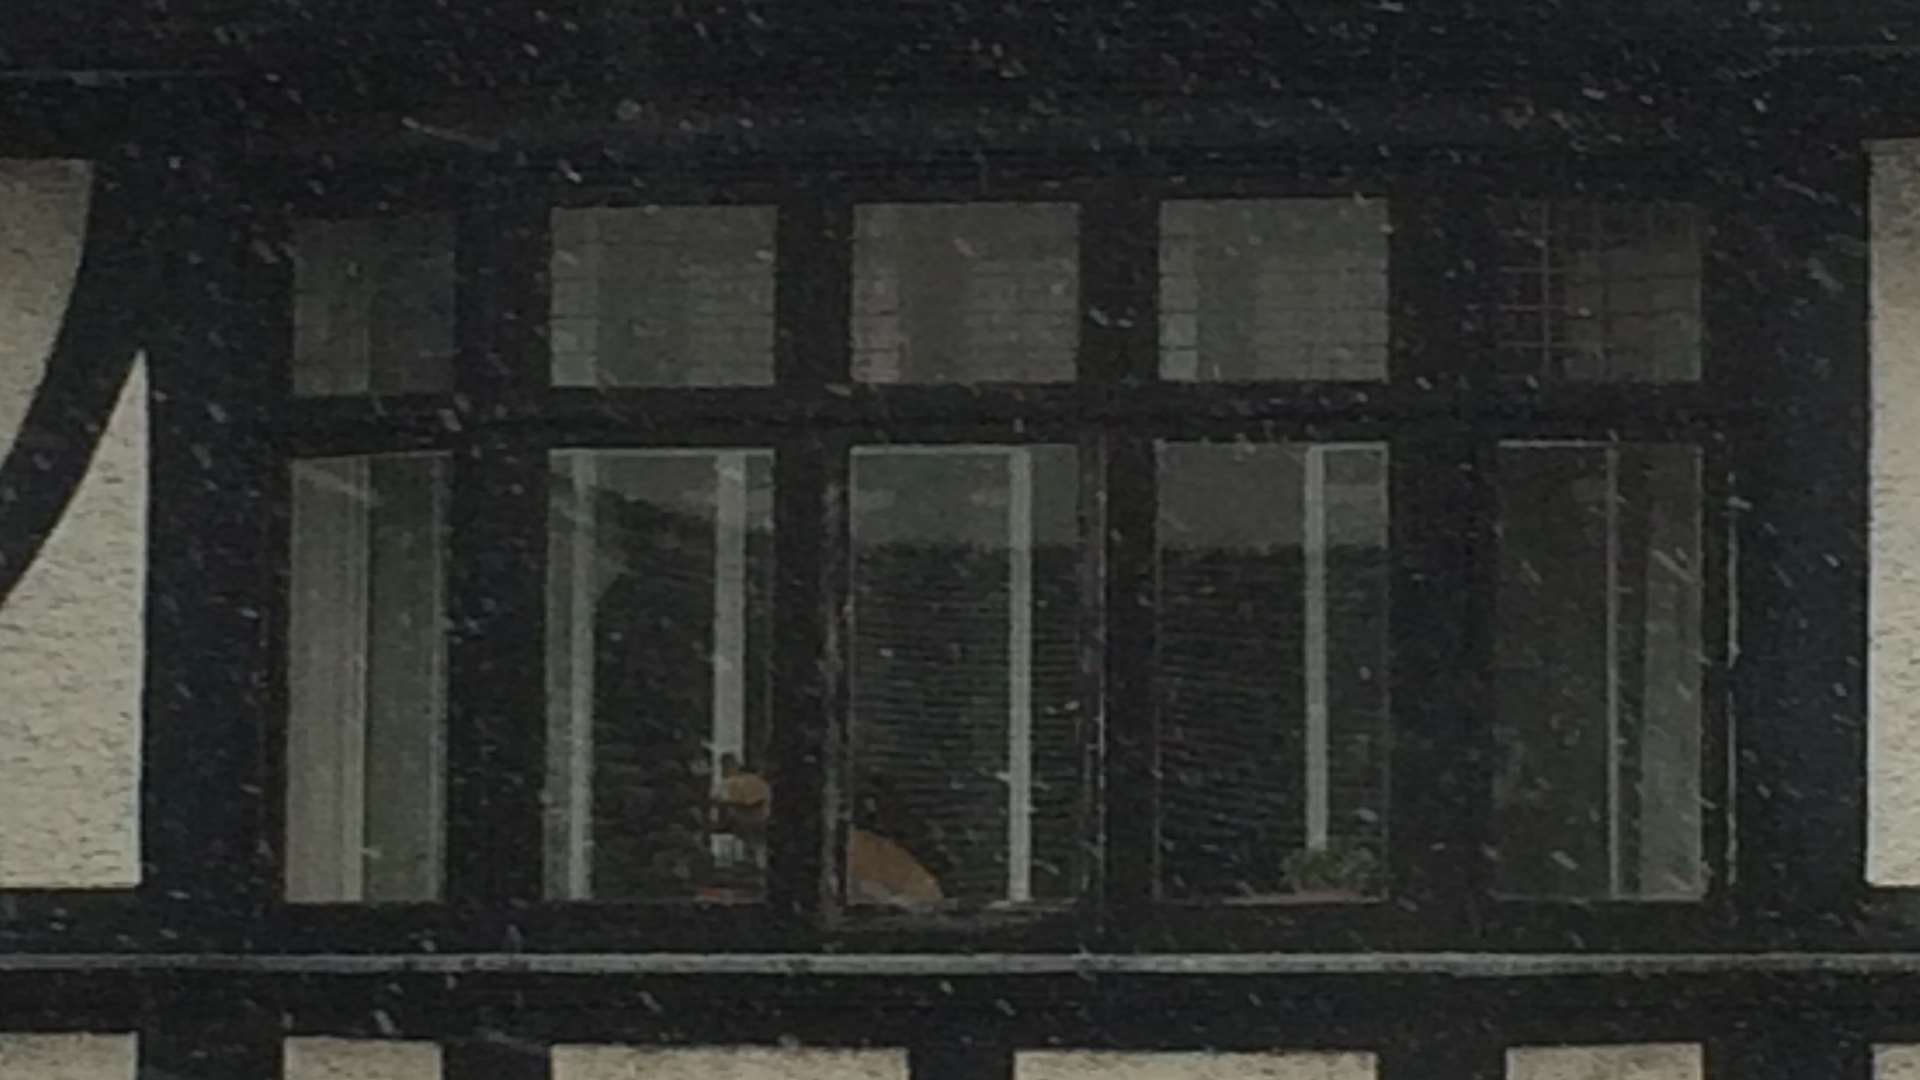 The KM reporters spotted this dog watching the snow in a building opposite our office.